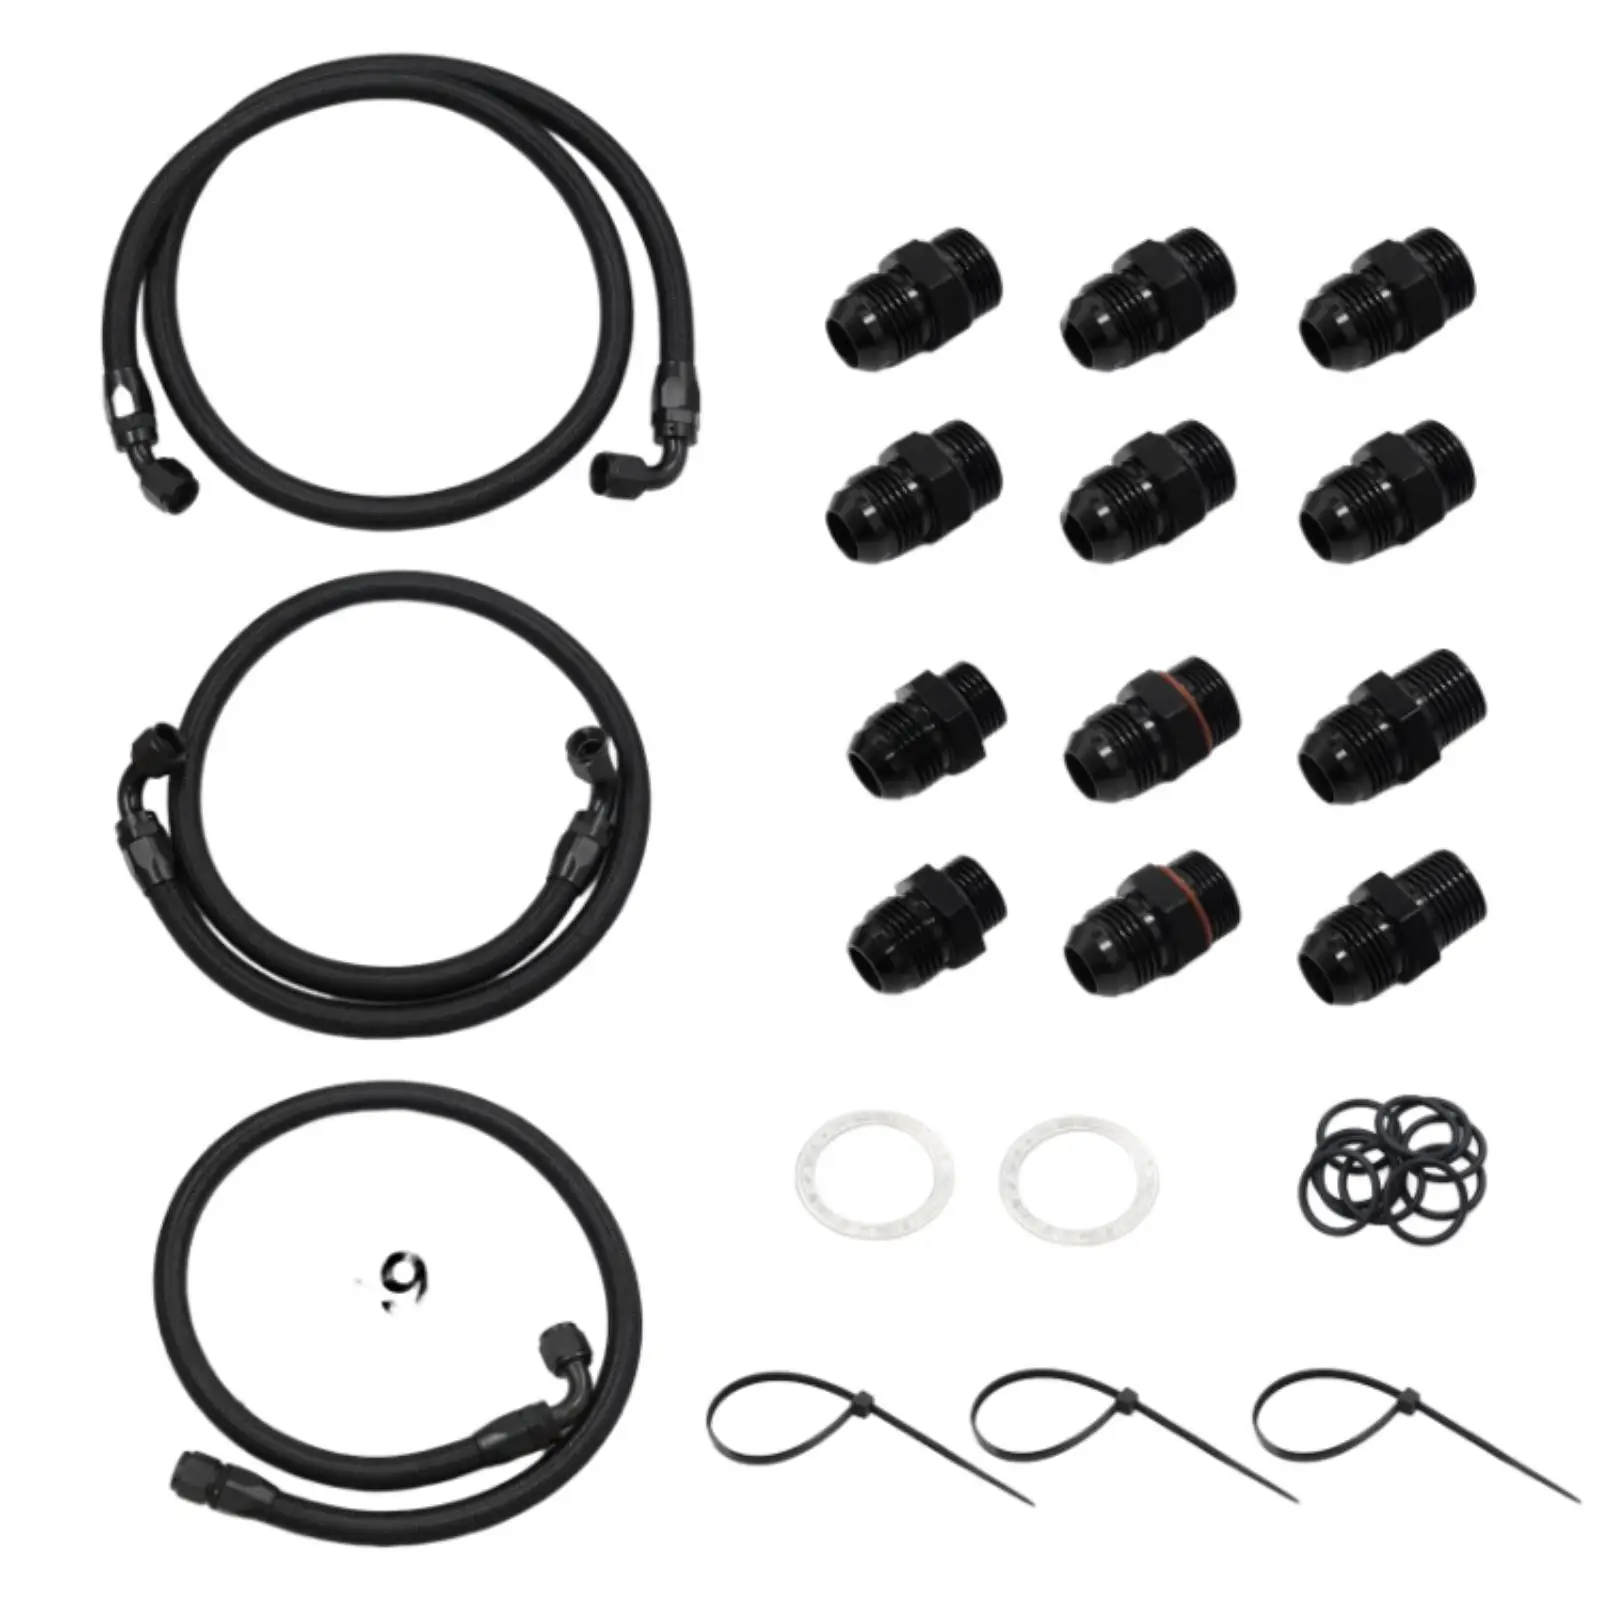 Transmission Cooler Lines Kit Easy to Install Heavy Duty Professional Replaces